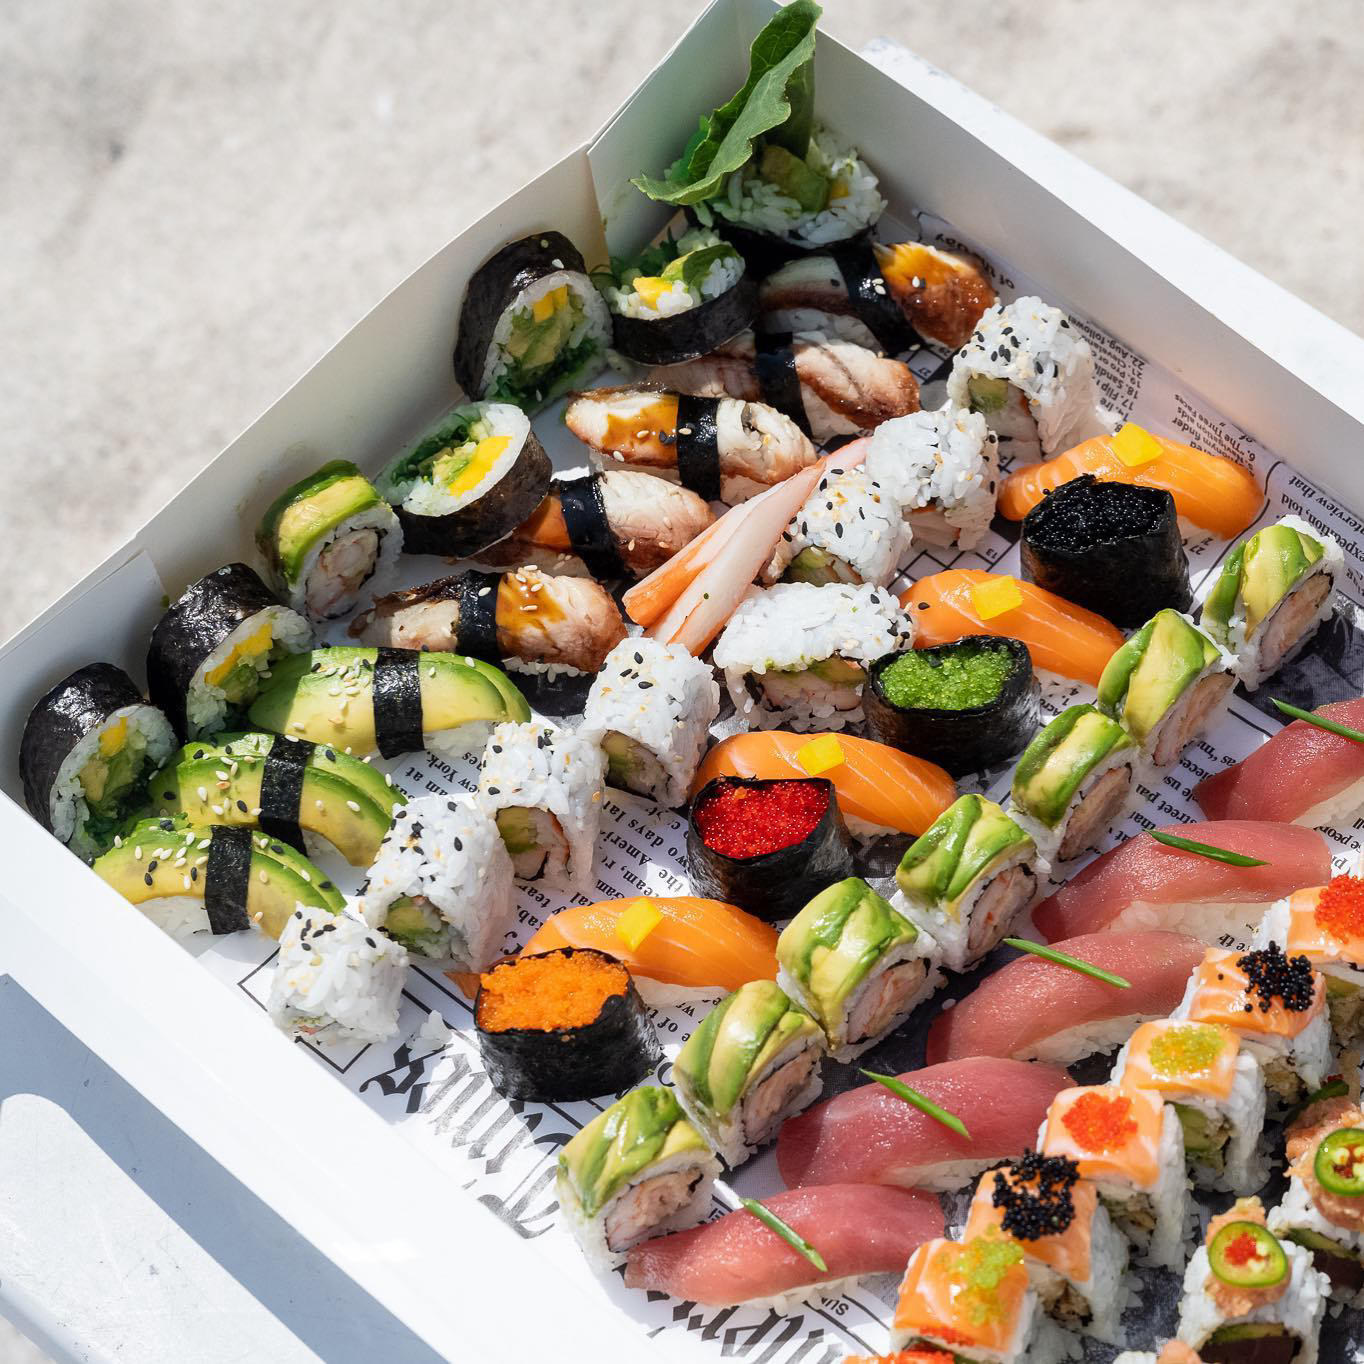 Ocean Kitchen - The perfect way to roll into the #weekend